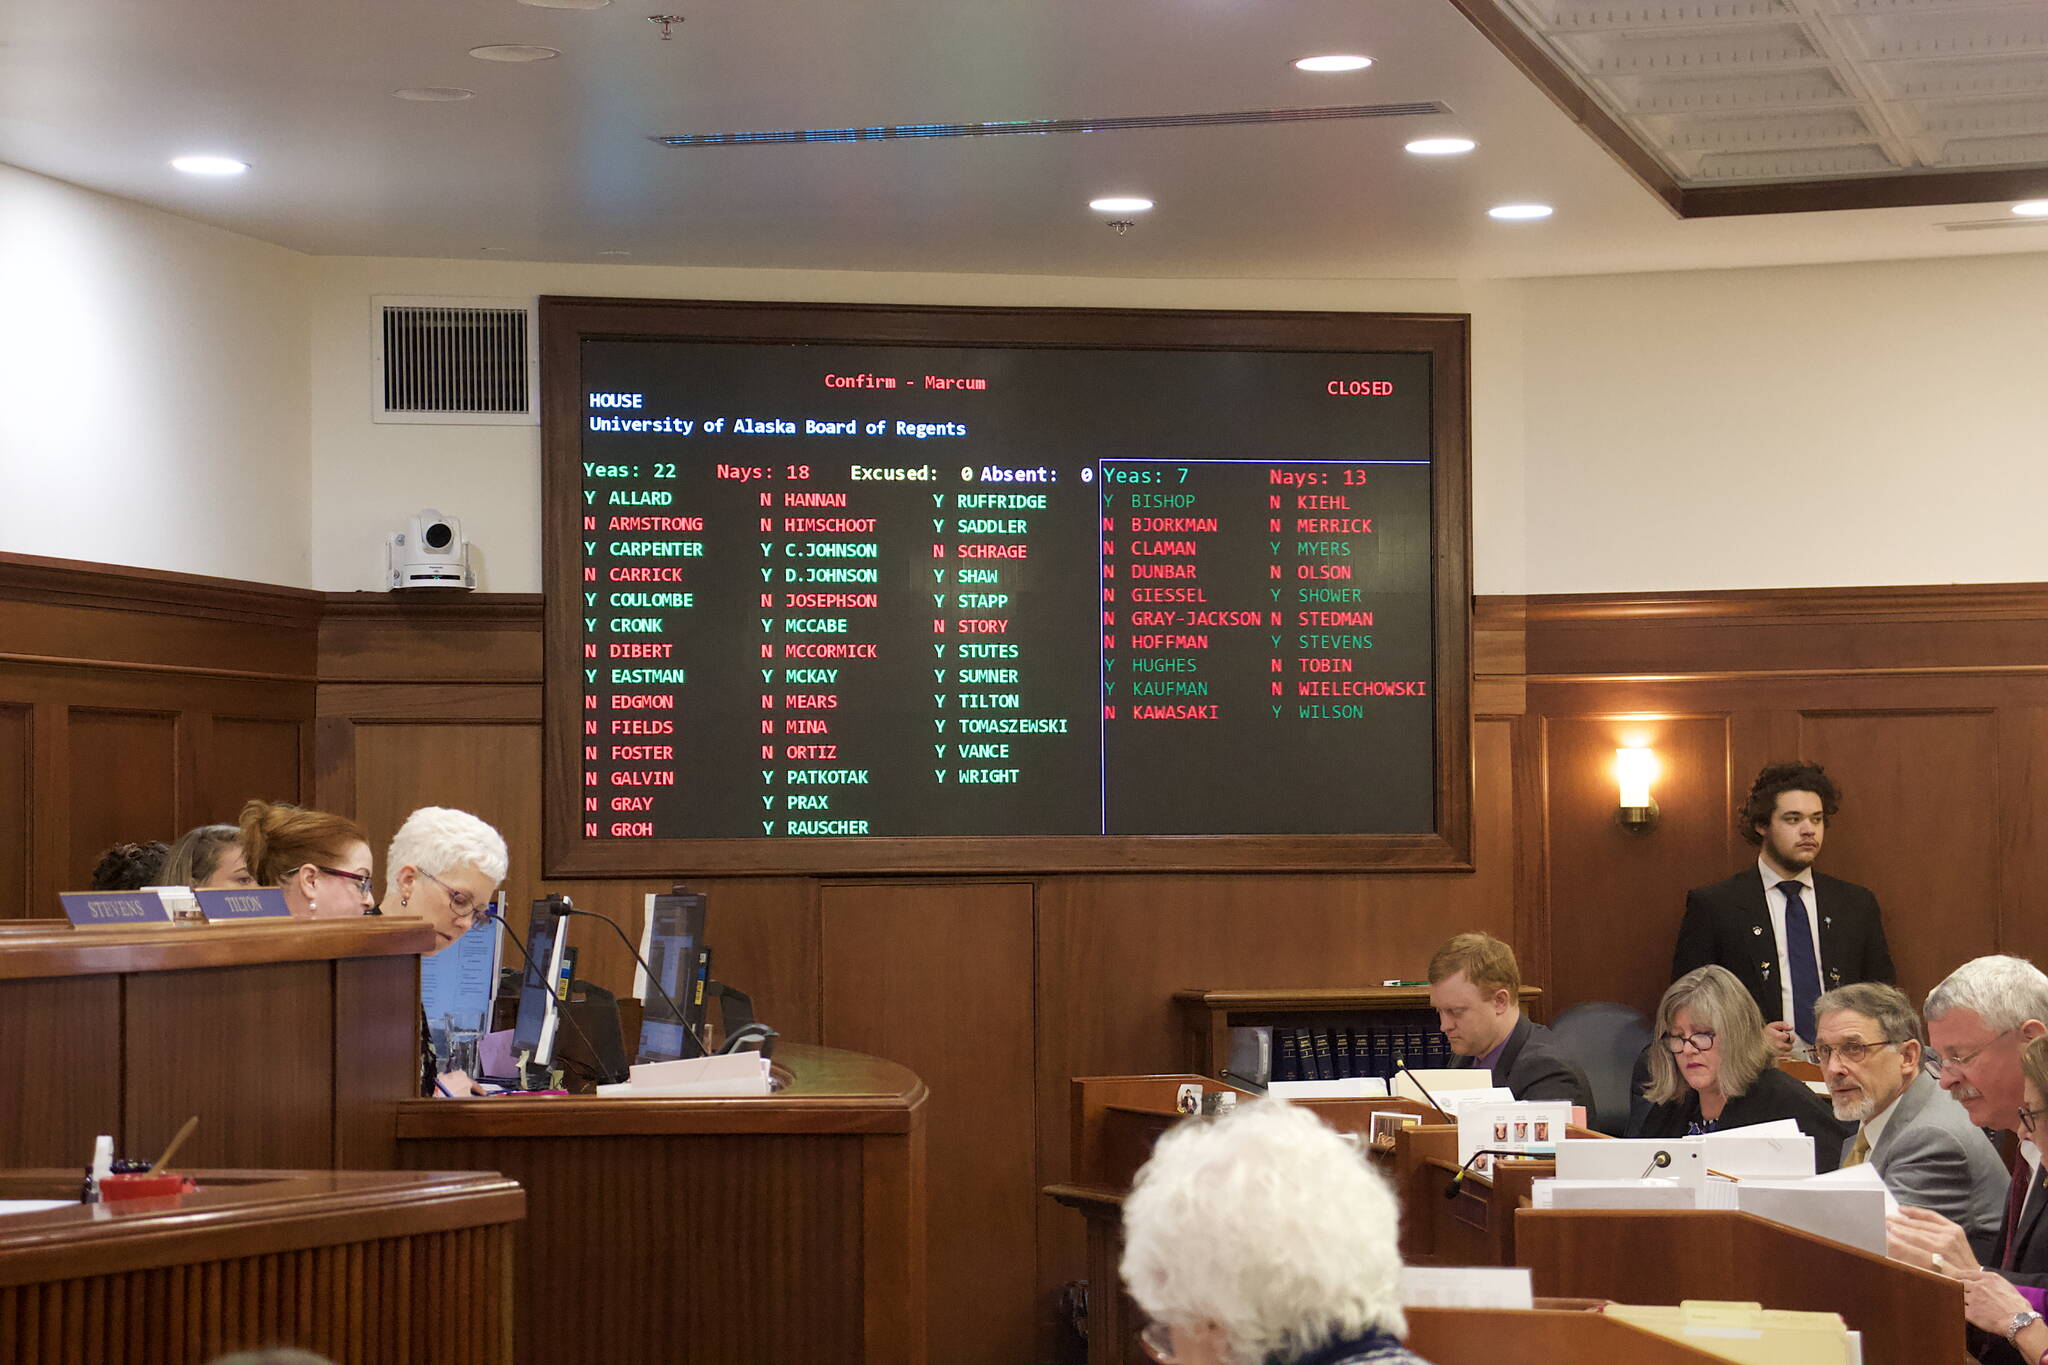 A joint session of the Alaska Legislature votes 29-31 to reject Bethany Marcum’s nomination by Gov. Mike Dunleavy to the University of Alaska’s Board of Regents on Tuesday. She was the only nominee rejected. (Mark Sabbatini / Juneau Empire)